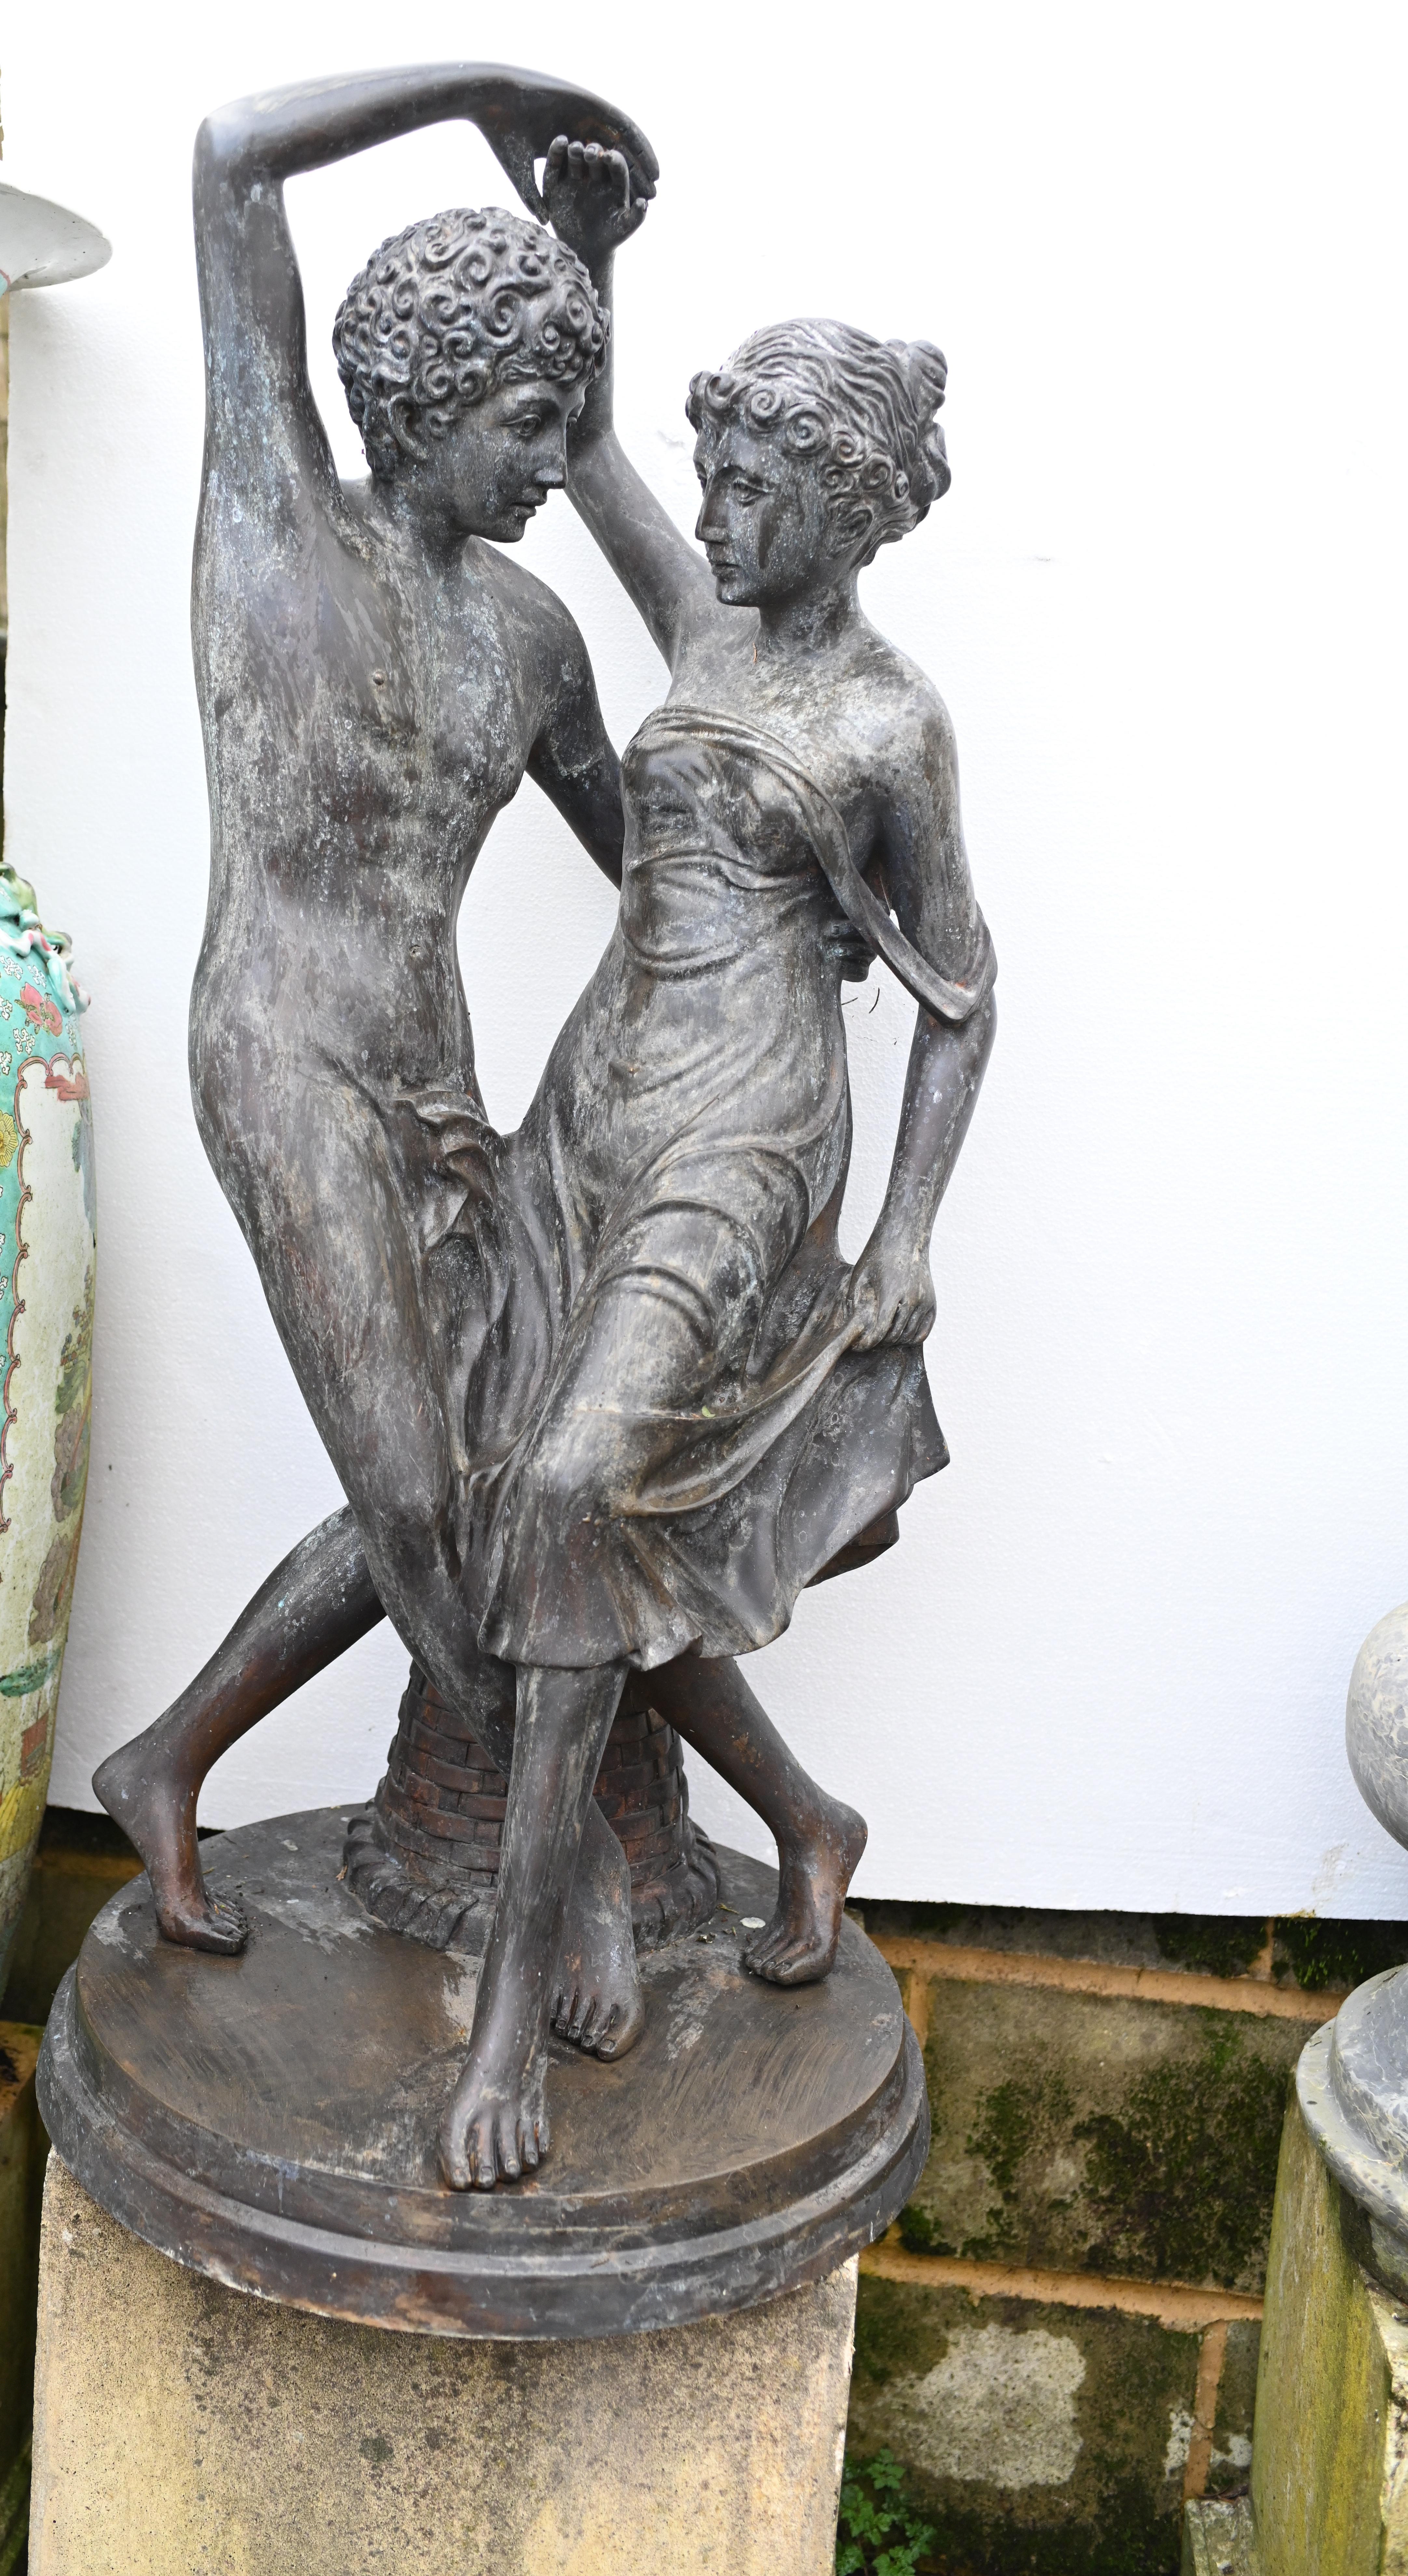 Eye catching Italian bronze depicting a pair of dancing Romans
Male is semi nude whilst female is toga clad
Good size at almost four feet tall - 114 CM
Would add an air of classical antiquity to any garden or room
Great collectors piece and of